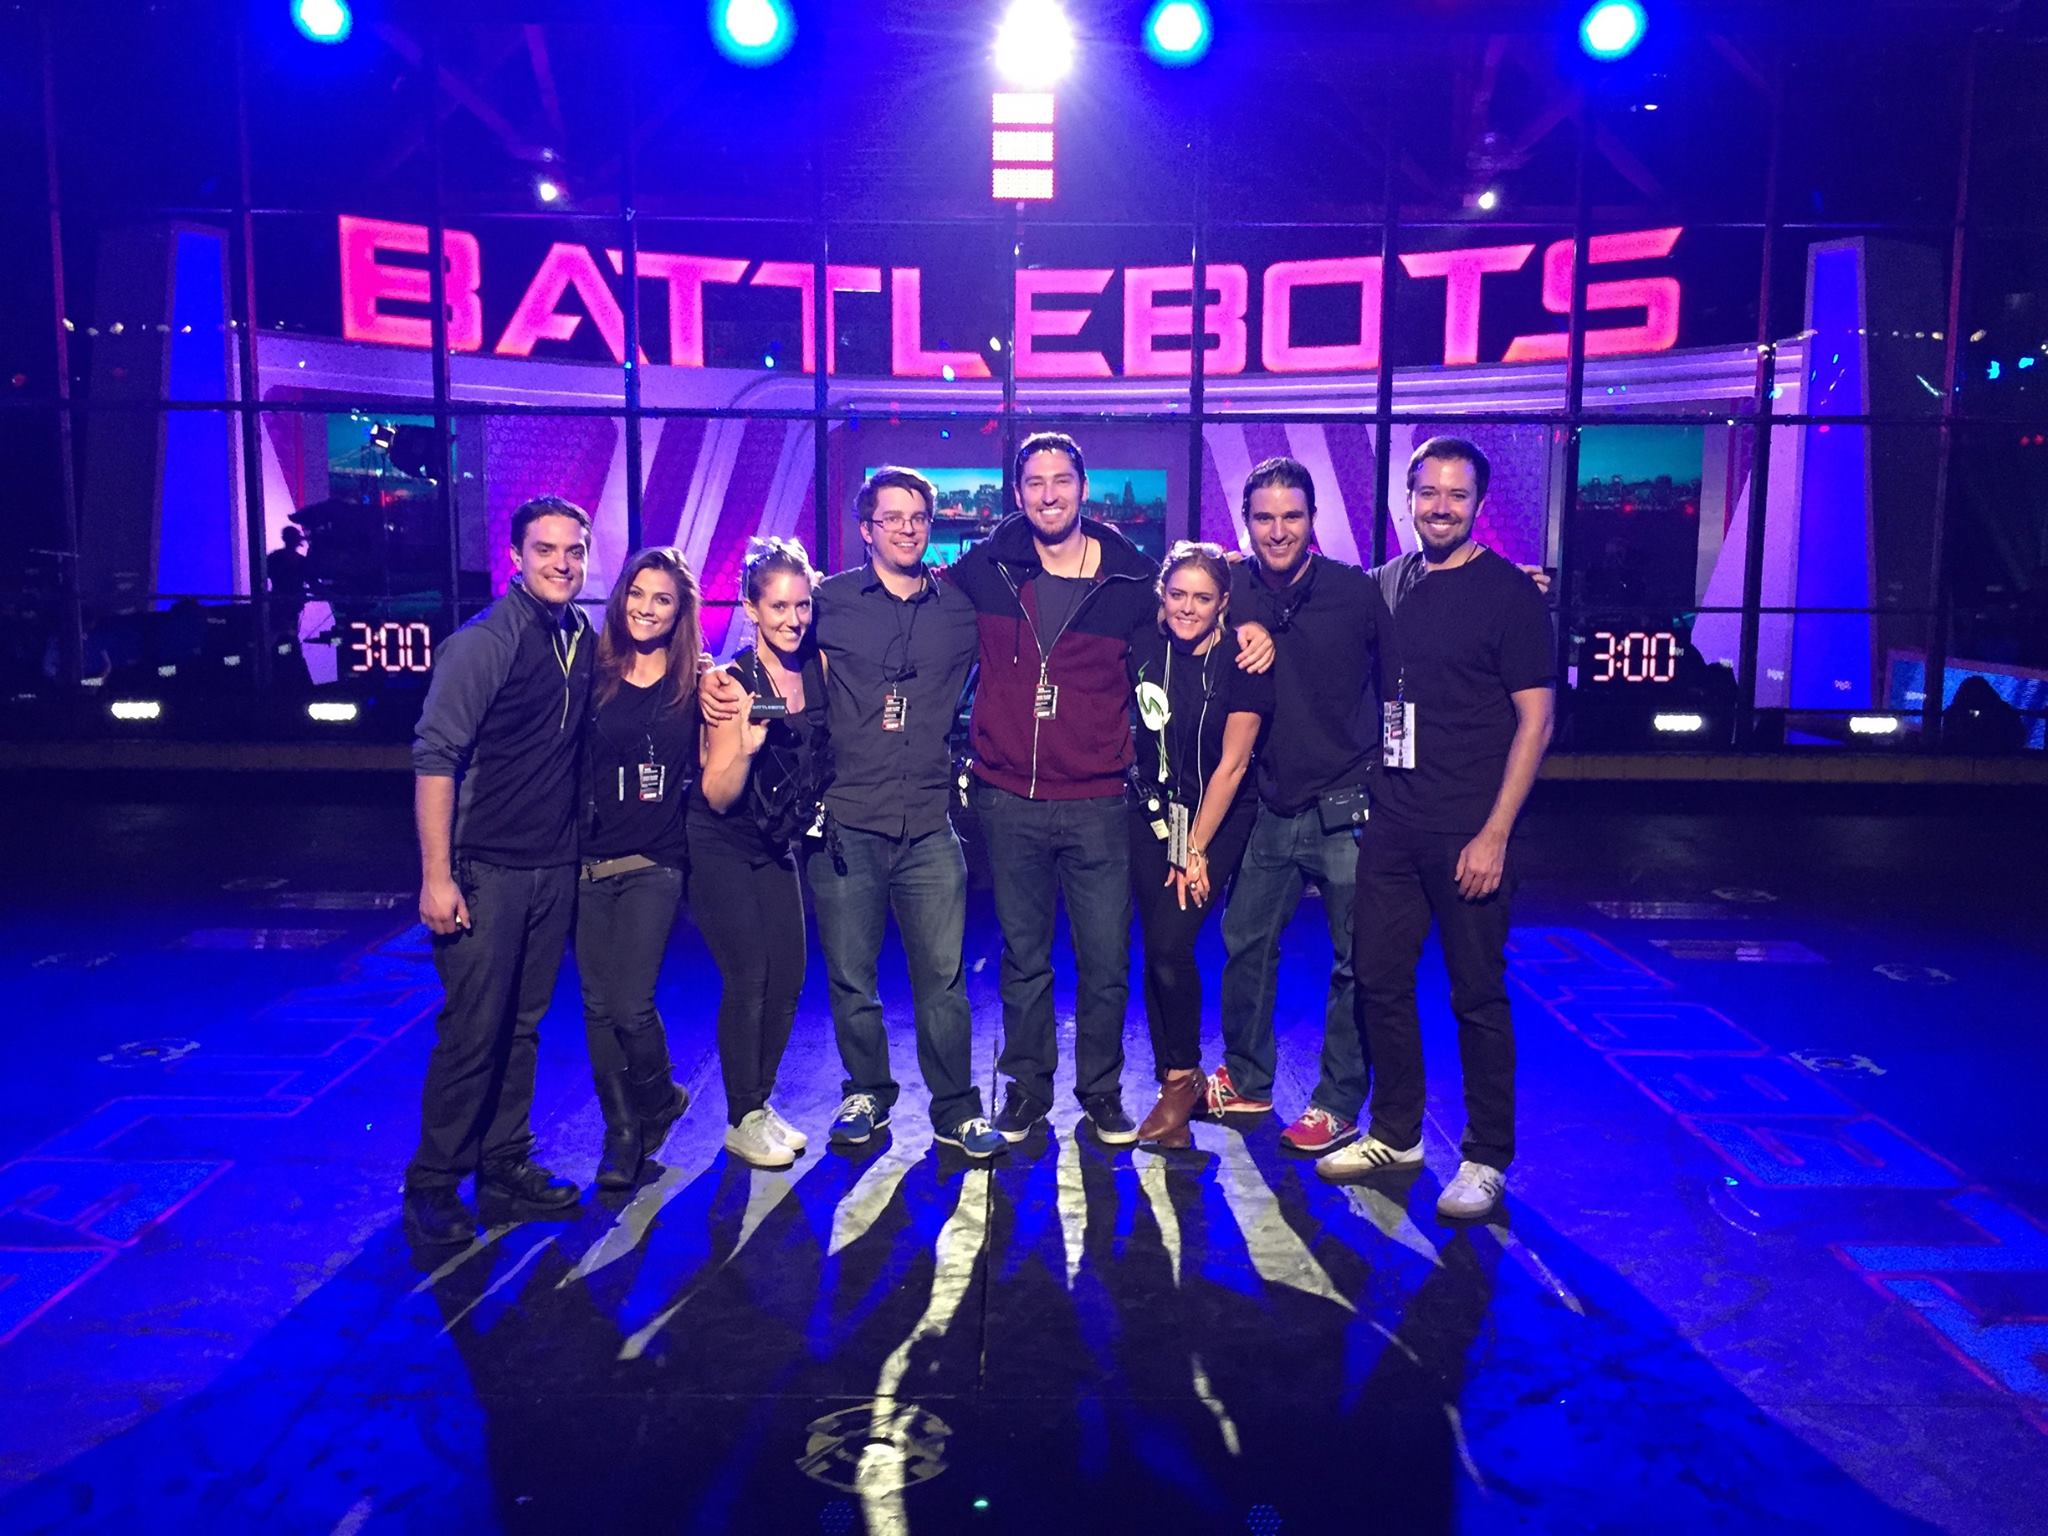 Burke Doeren (right) working as a Director of Photography alongside Producers and Associate Producers on Season 1 of Battlebots 2015.